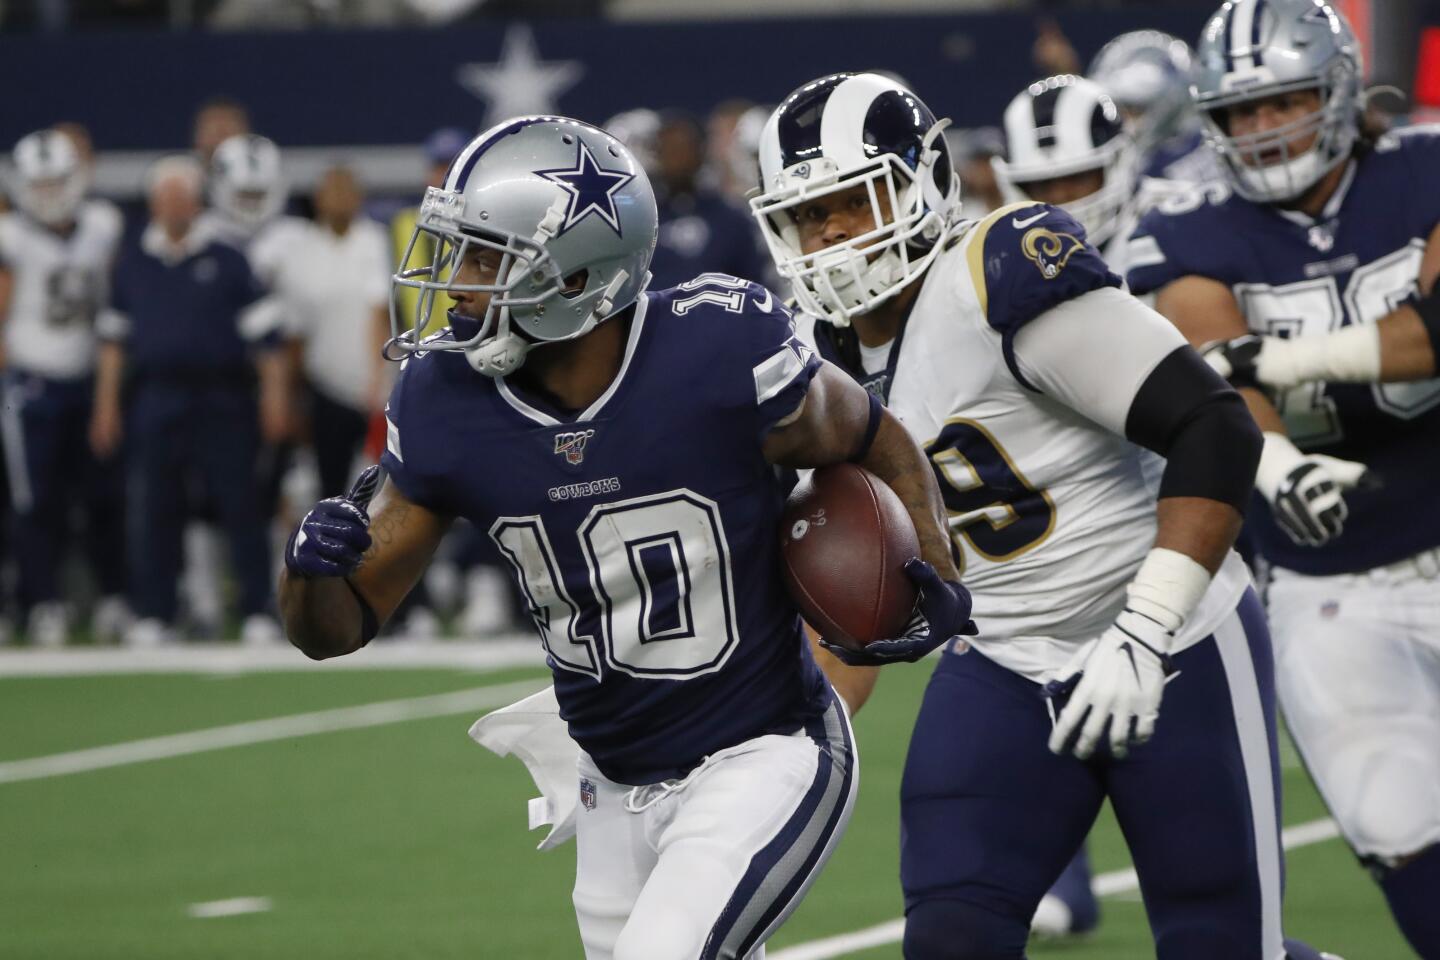 Dallas Cowboys wide receiver Tavon Austin (10) carries the ball past Los Angeles Rams defensive tackle Aaron Donald, front right, in the first half of an NFL football game in Arlington, Texas, Sunday, Dec. 15, 2019. (AP Photo/Roger Steinman)